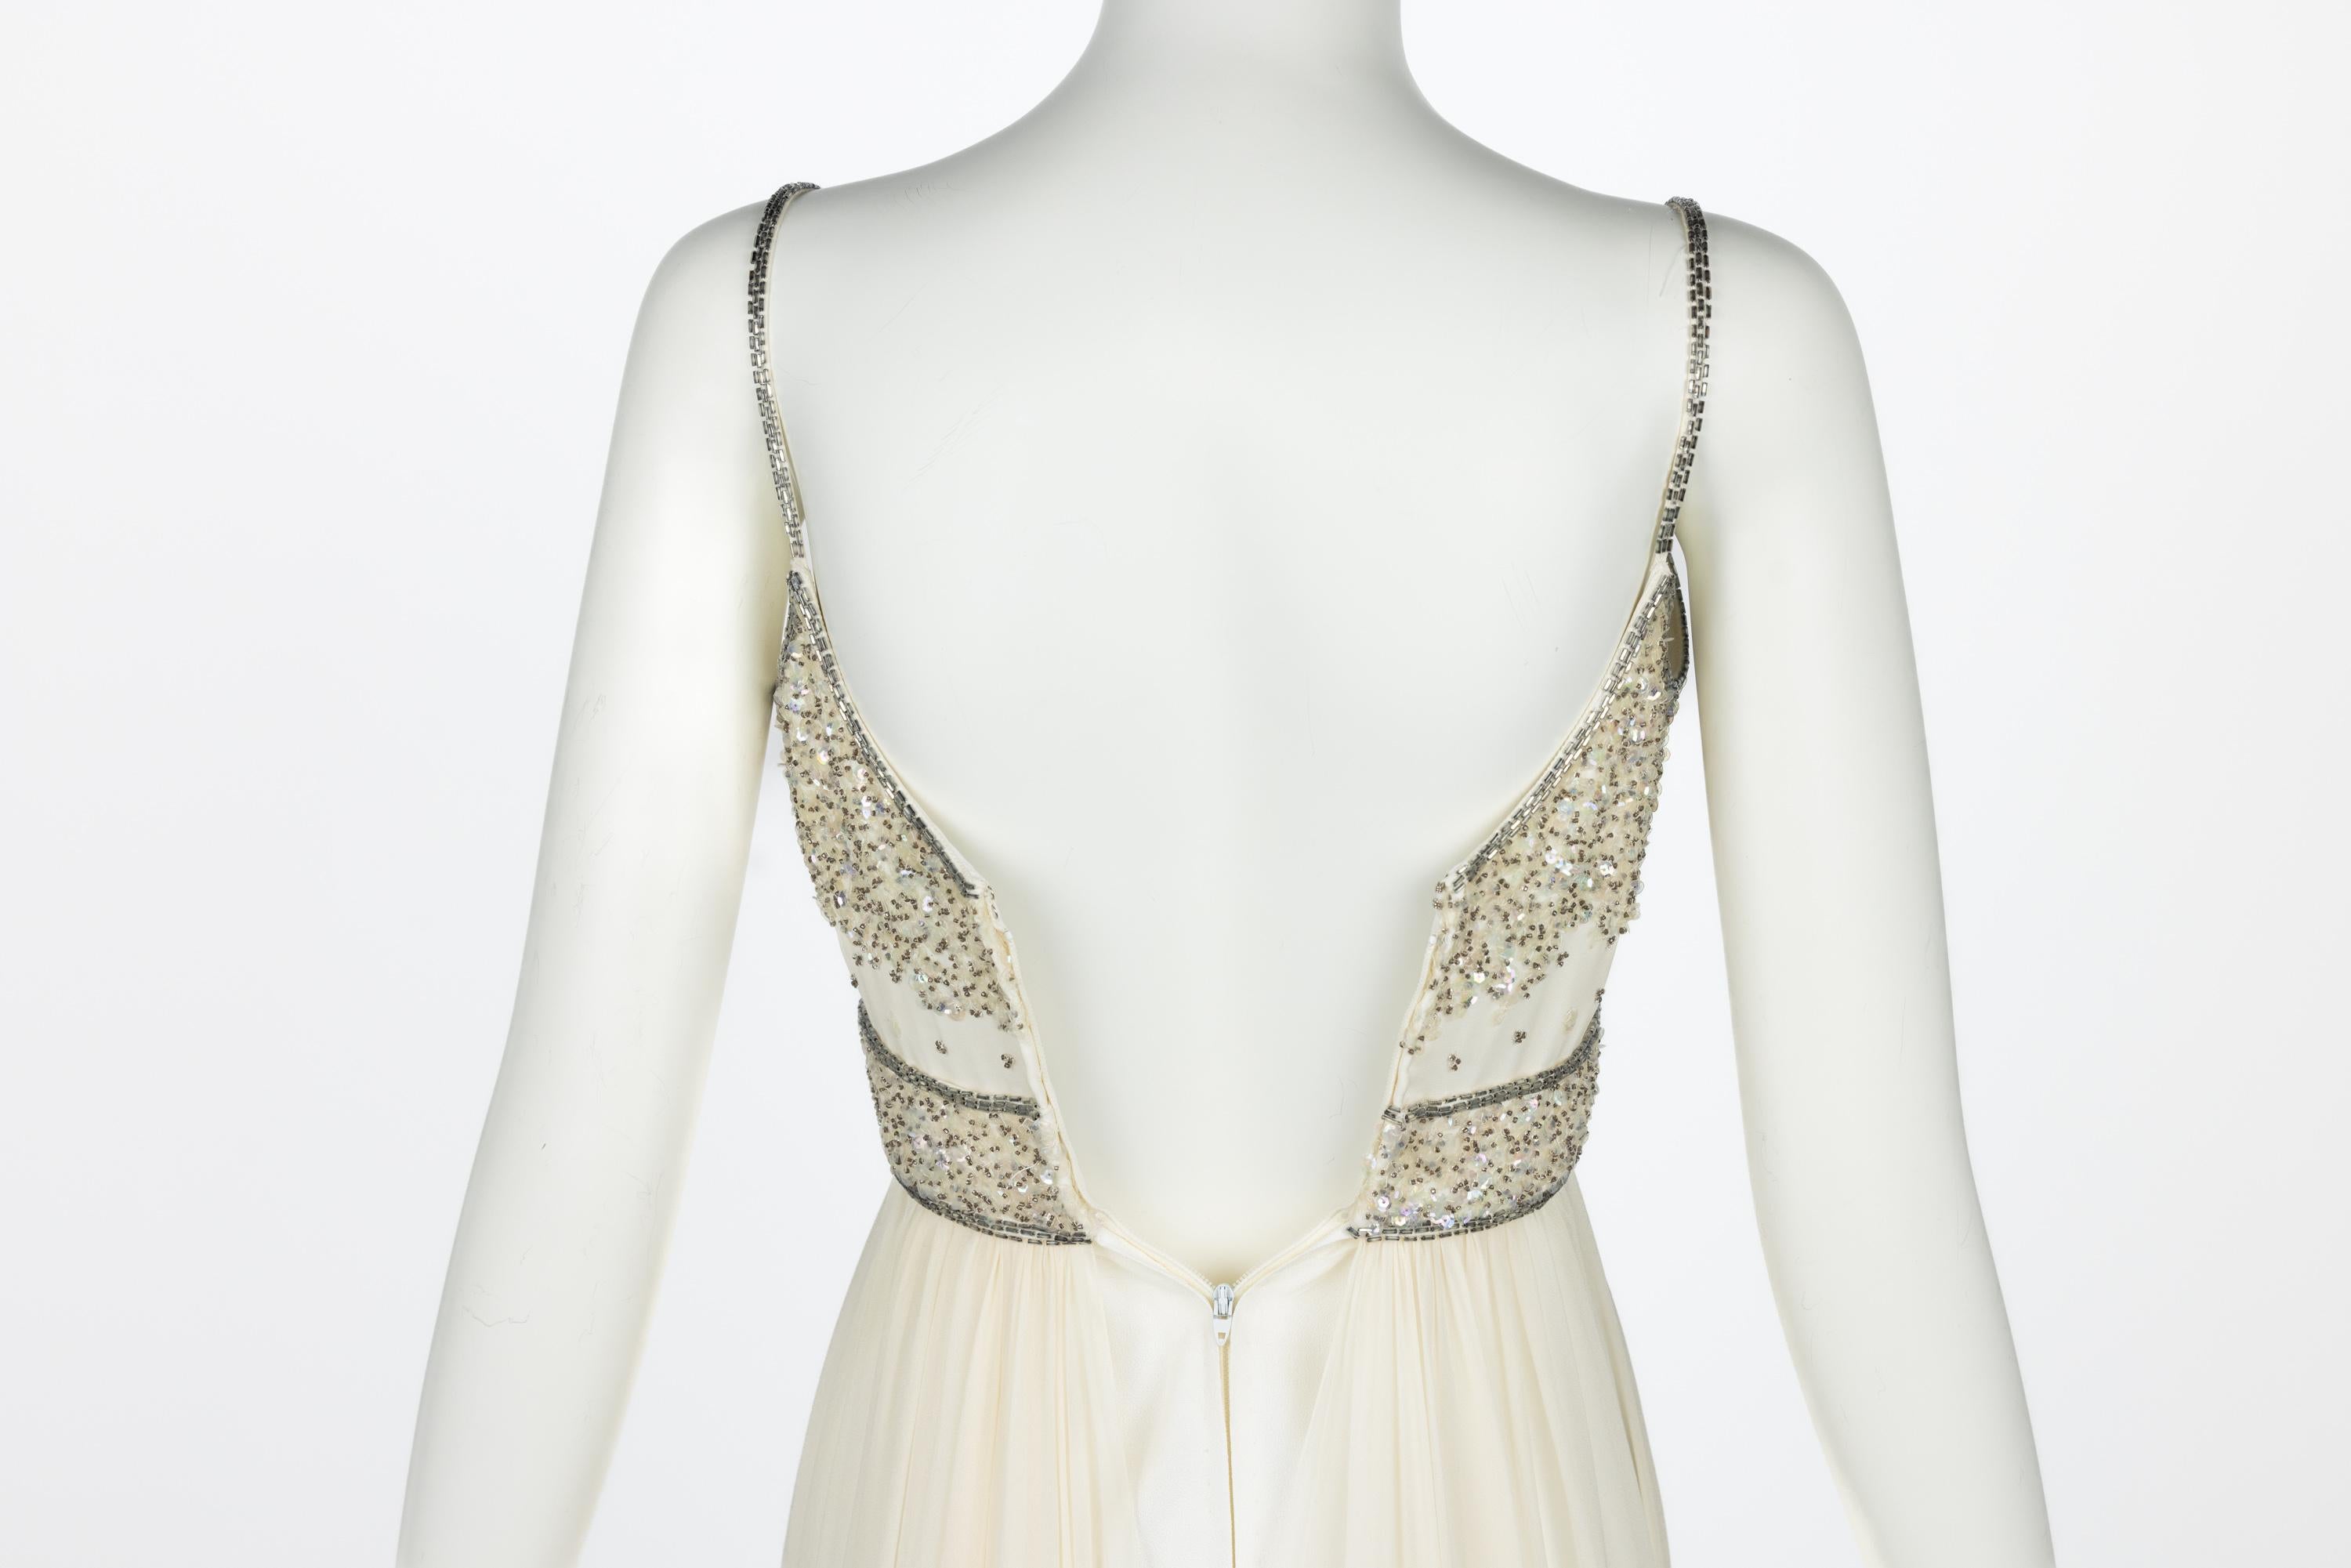 Alfred Bosand Ivory beaded Bodice Silk chiffon Gown, 1970s For Sale 1